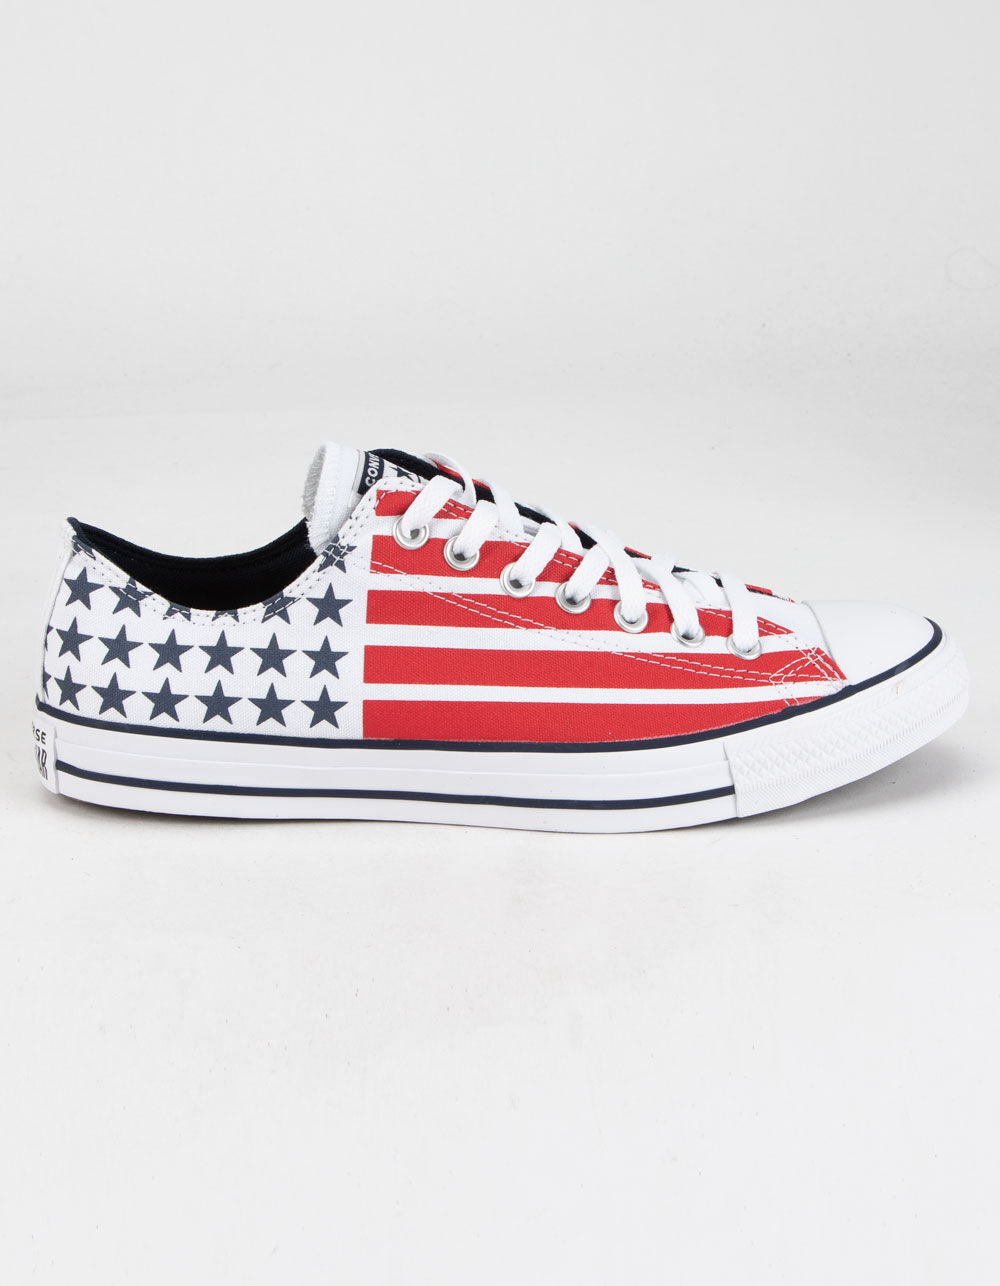 CONVERSE Stars Stripes Chuck Taylor All Star Low Top Shoes - RED/WHITE/NAVY | Tillys